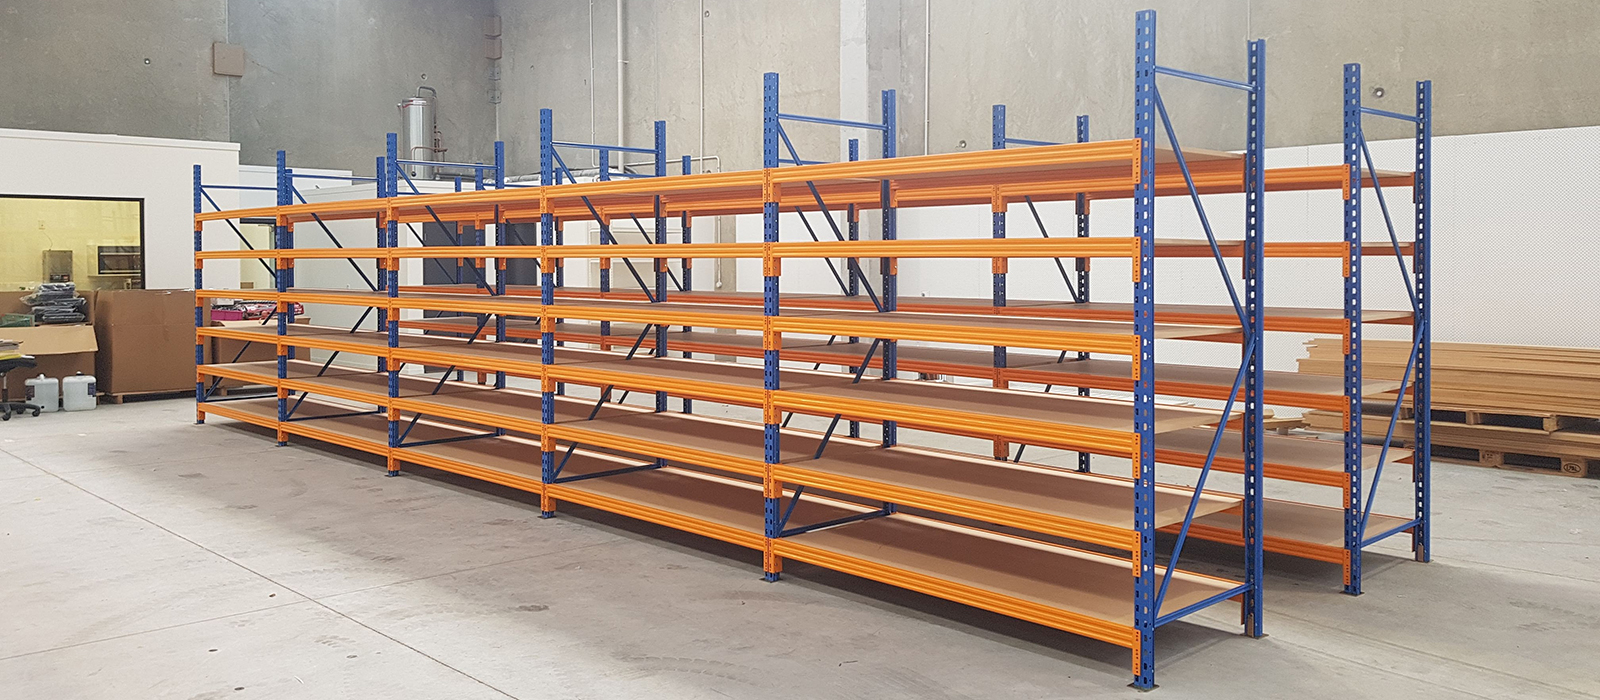 BNT Store Fitout, Industrial Shelving, STACK-iT Series Shelving, Picking Shelves, Parts Storage